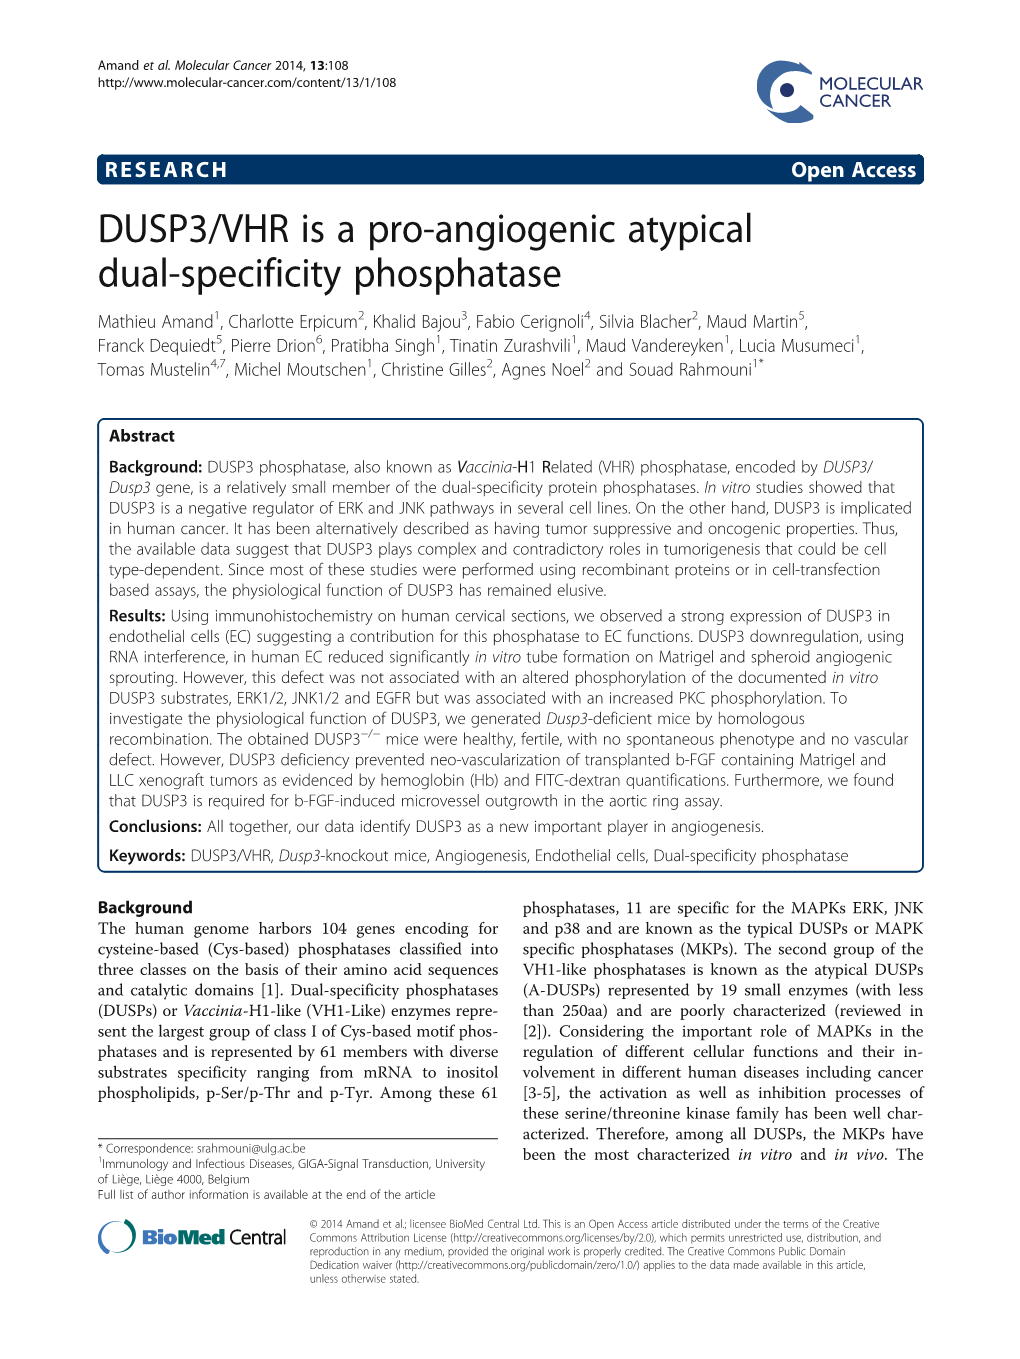 DUSP3/VHR Is a Pro-Angiogenic Atypical Dual-Specificity Phosphatase